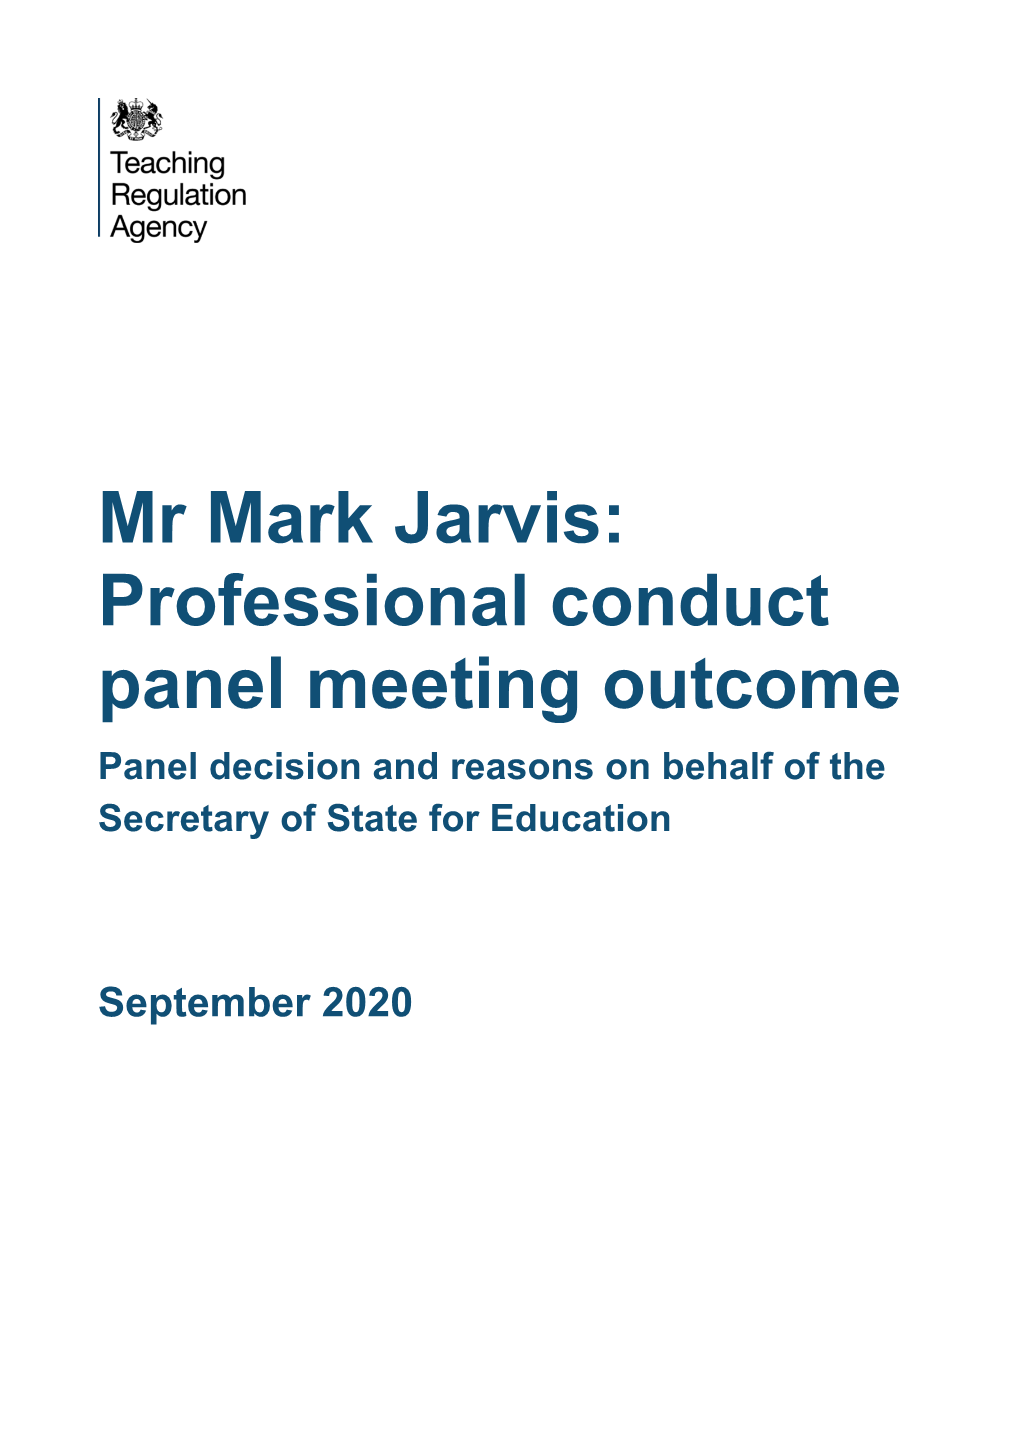 Mr Mark Jarvis: Professional Conduct Panel Meeting Outcome Panel Decision and Reasons on Behalf of the Secretary of State for Education